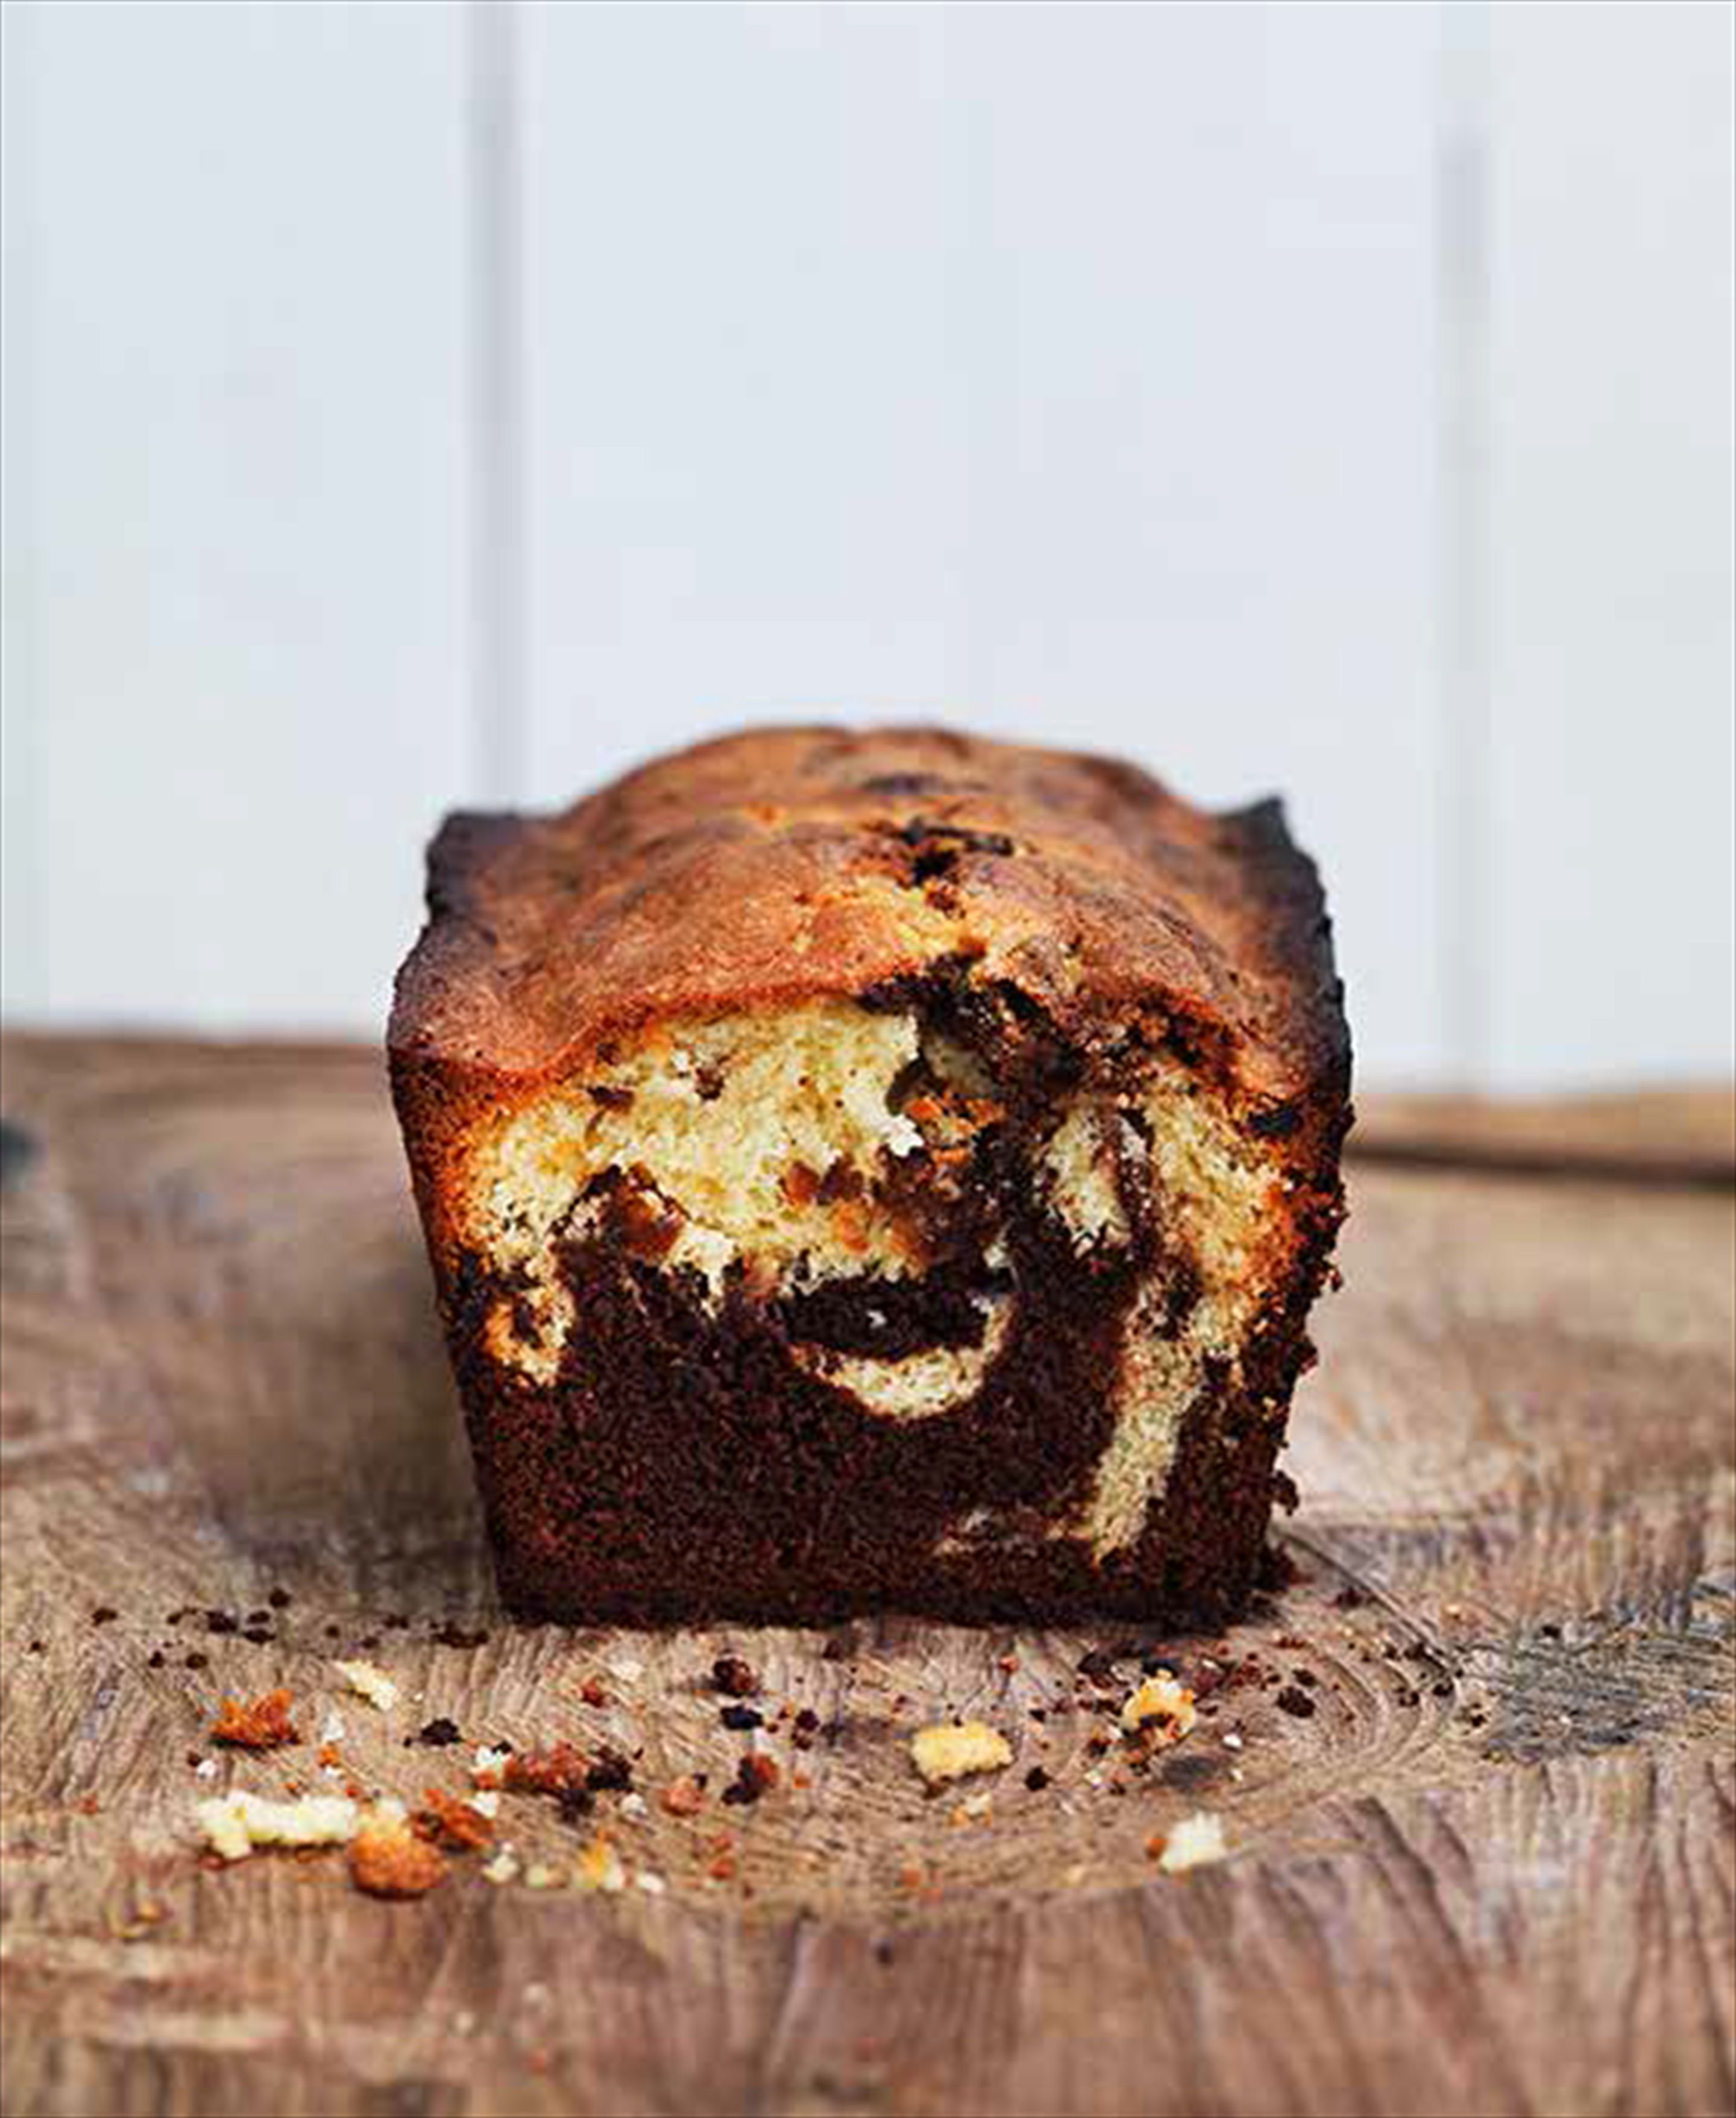 Apricot and chocolate marble cake